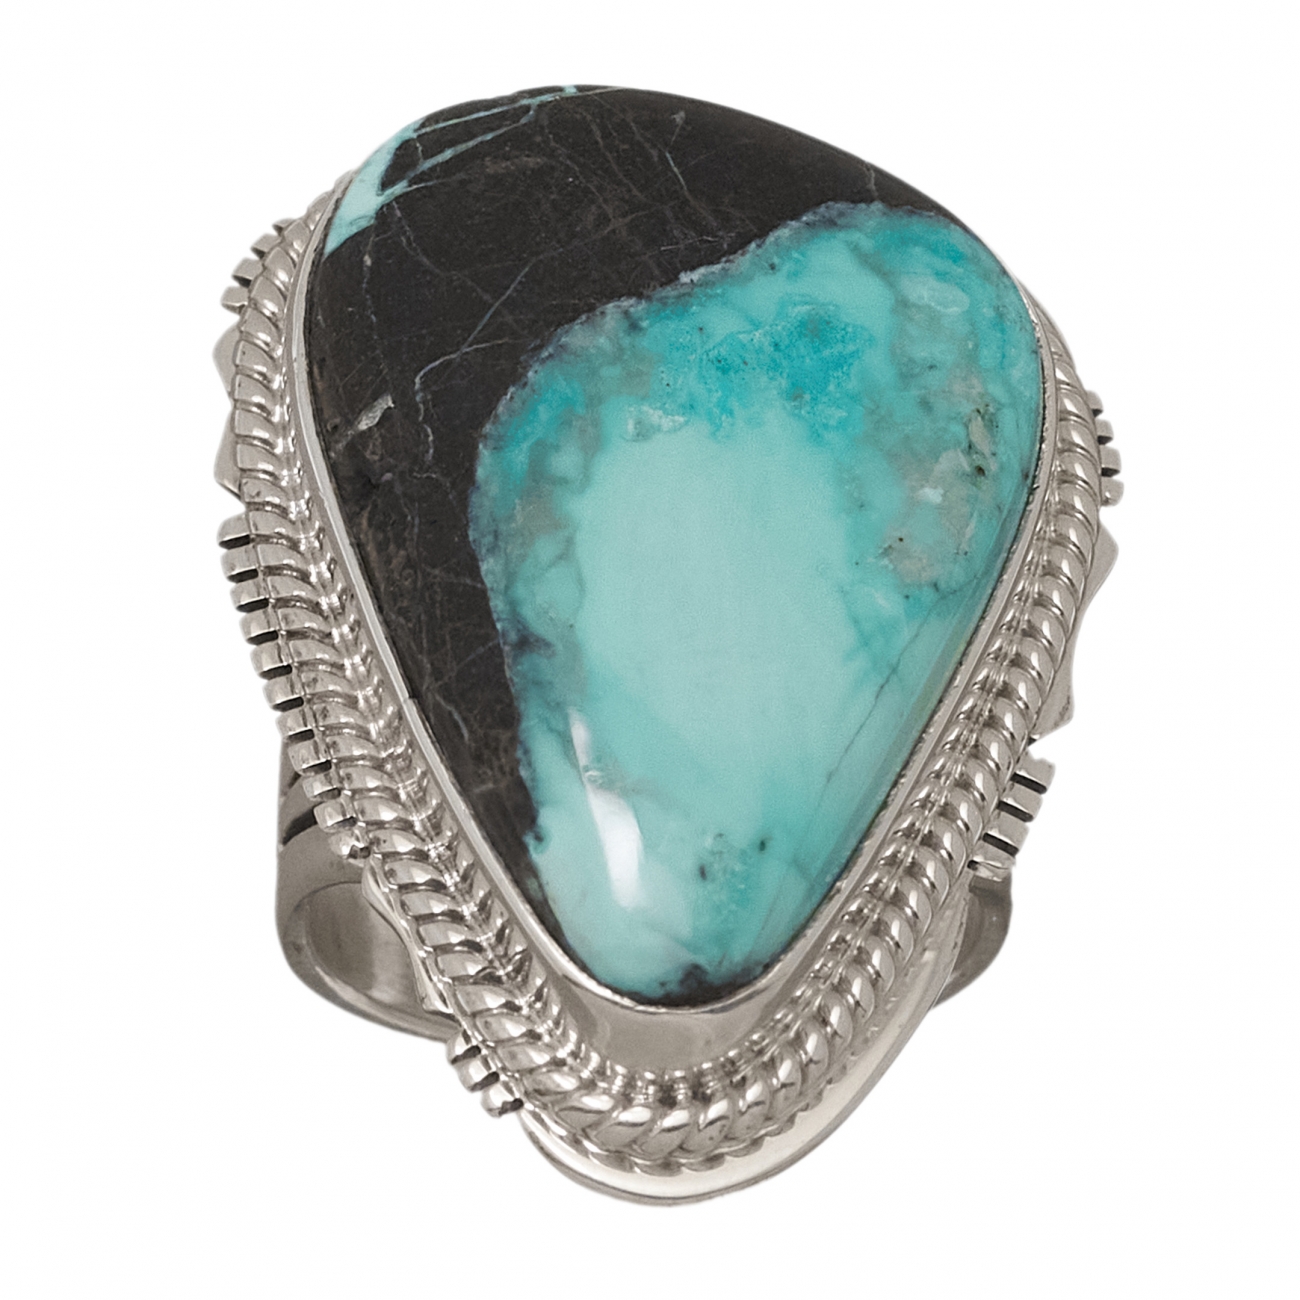 Navajo ring for women BA1235 in turquoise and silver - Harpo Paris